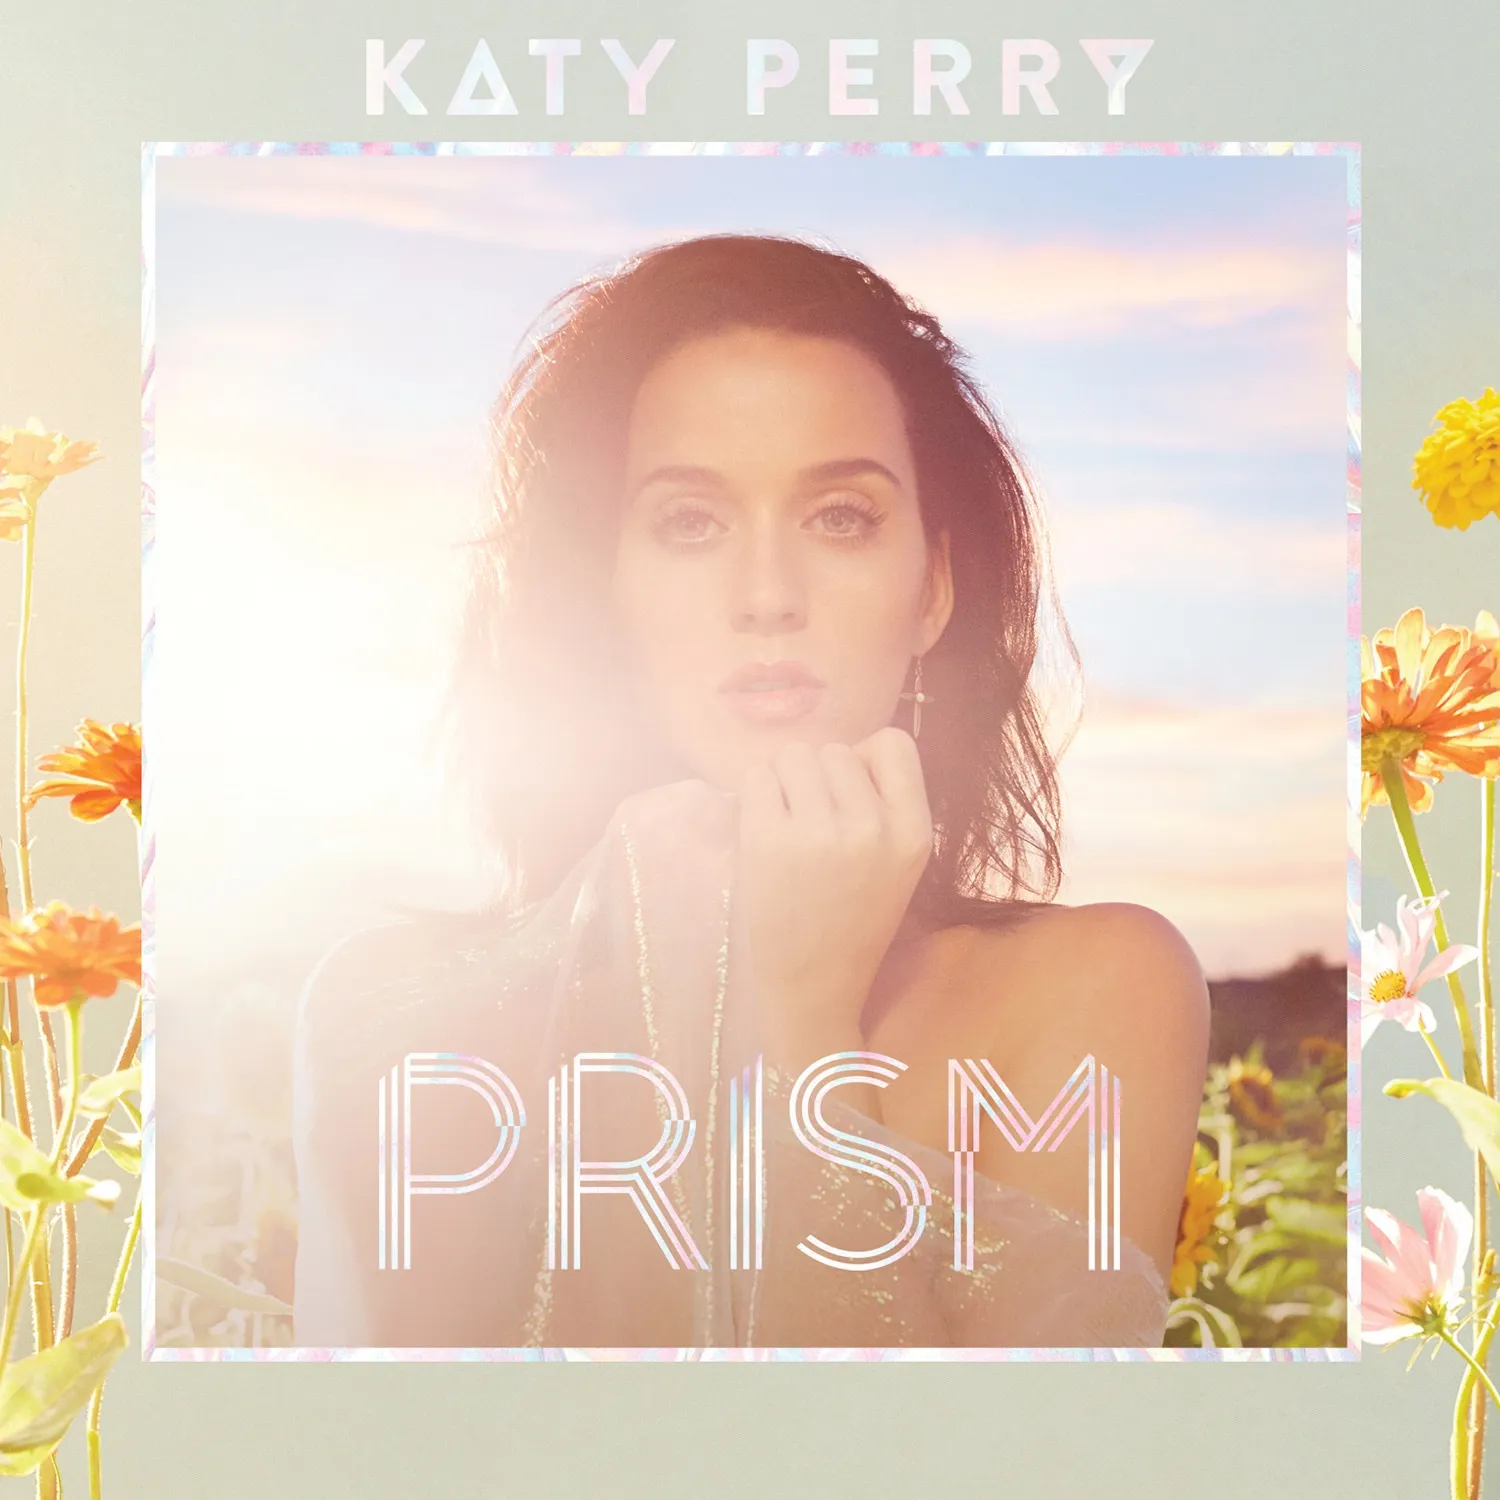 <strong>Katy Perry - Prism</strong> (Vinyl LP - clear)